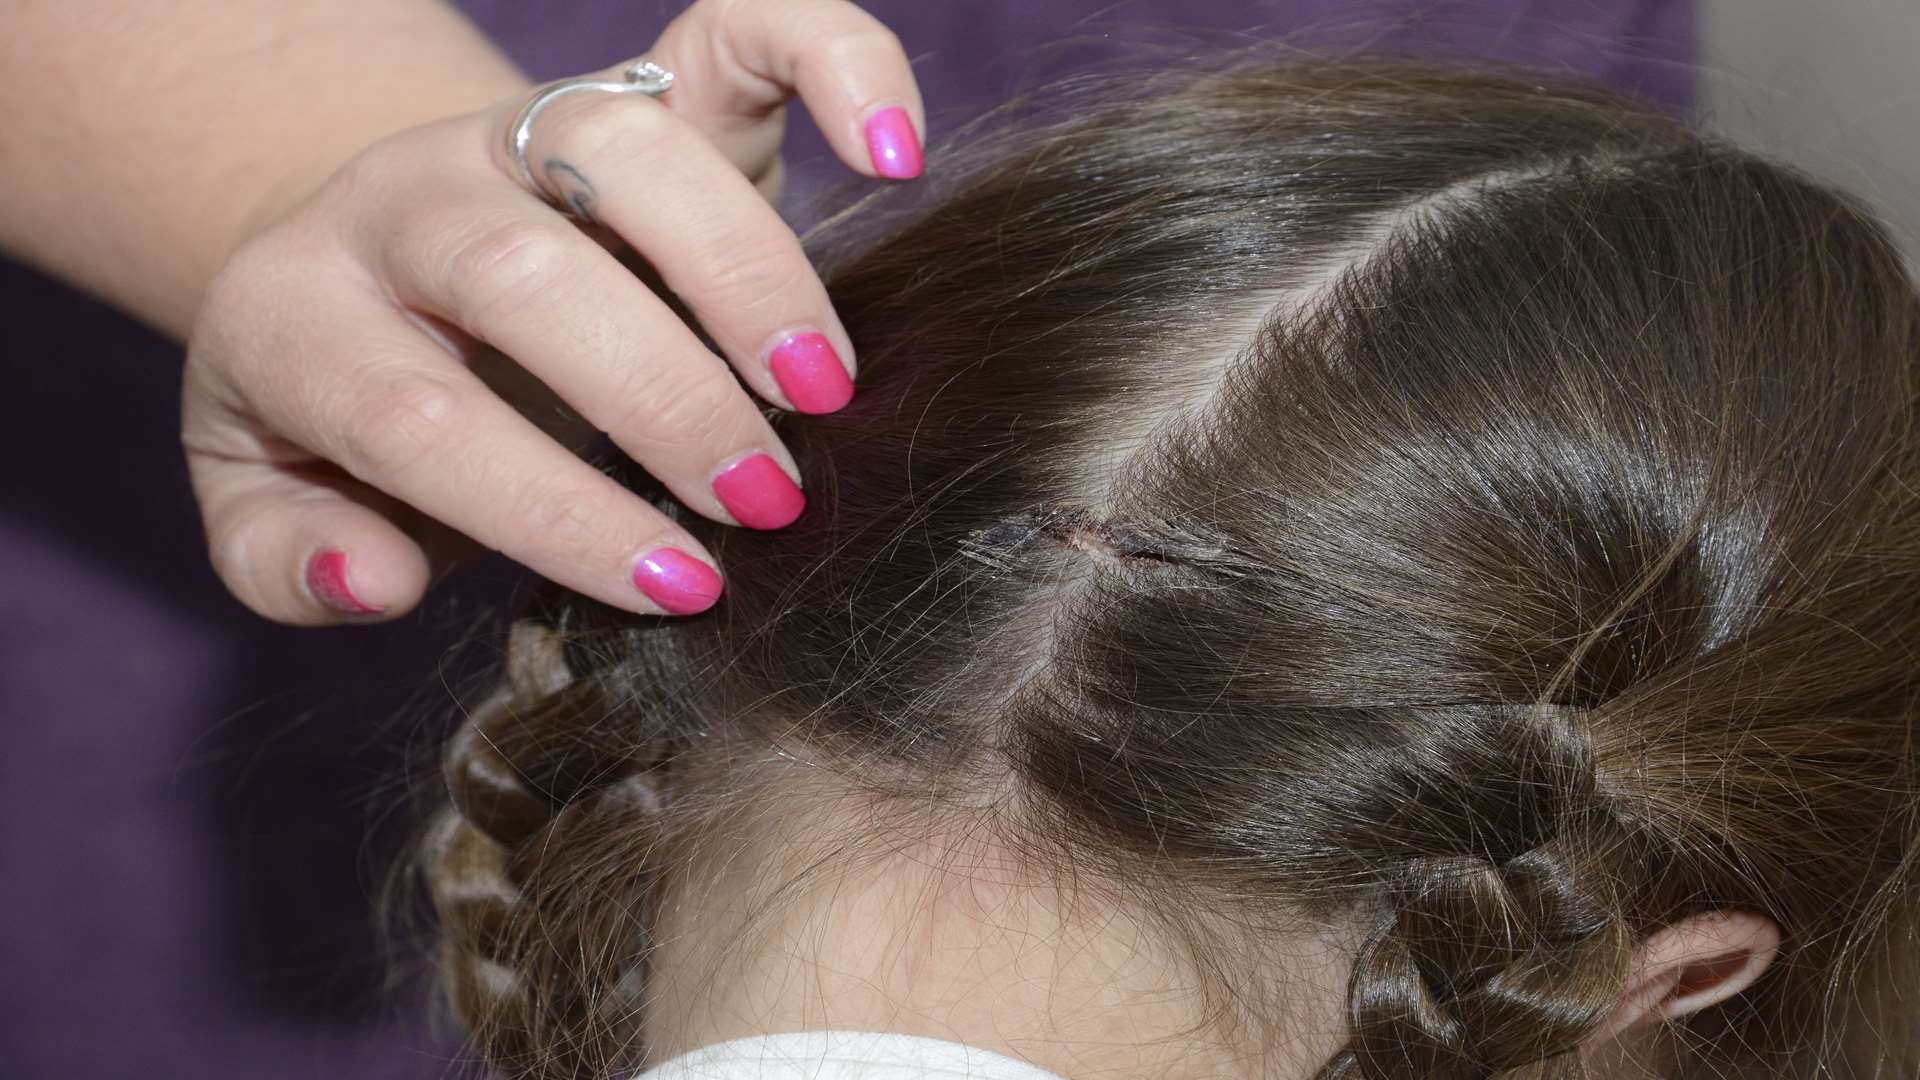 The gash in Lily's head